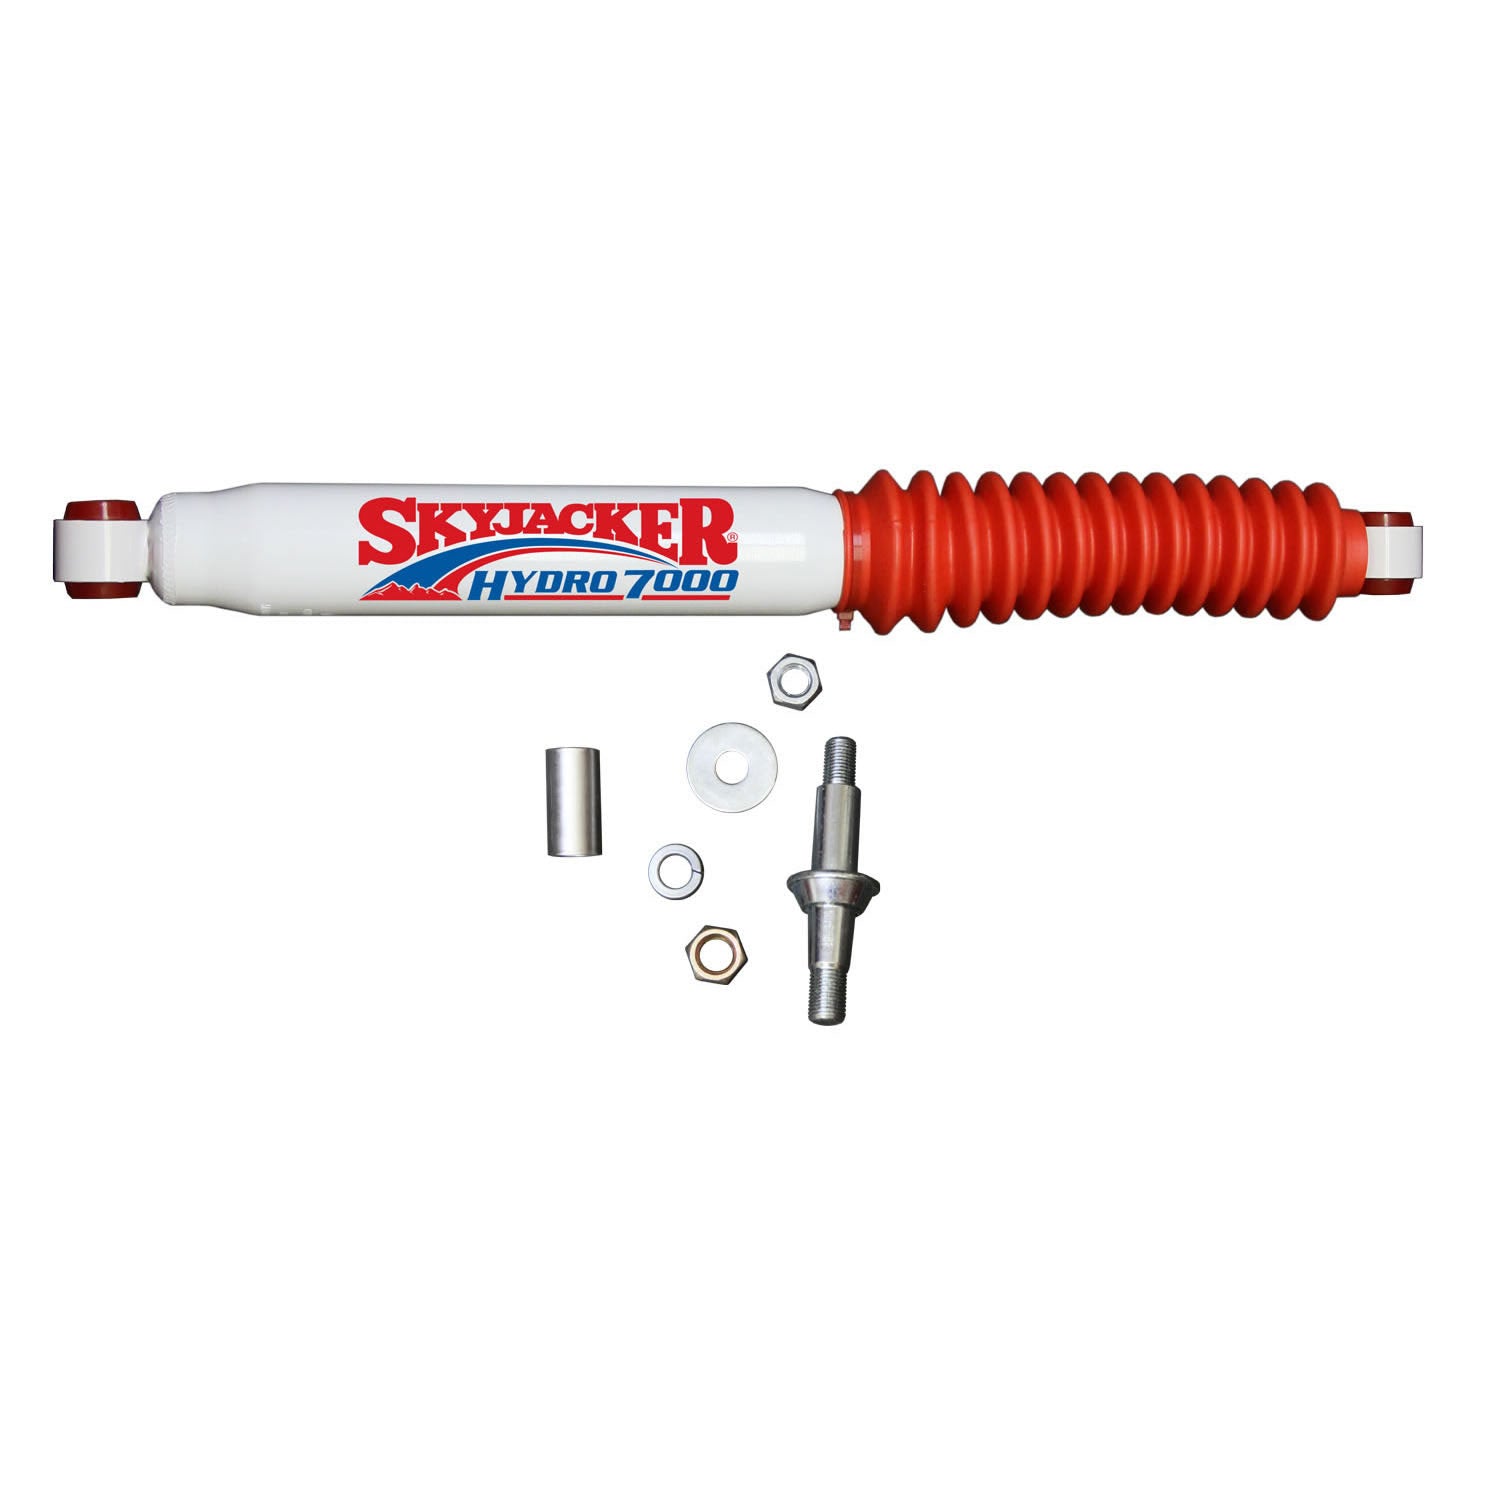 Steering Stabilizer Extended Length 20.62 Inch Collapsed Length 12.62 Inch Replacement Cylinder Only No Hardware Included Skyjacker